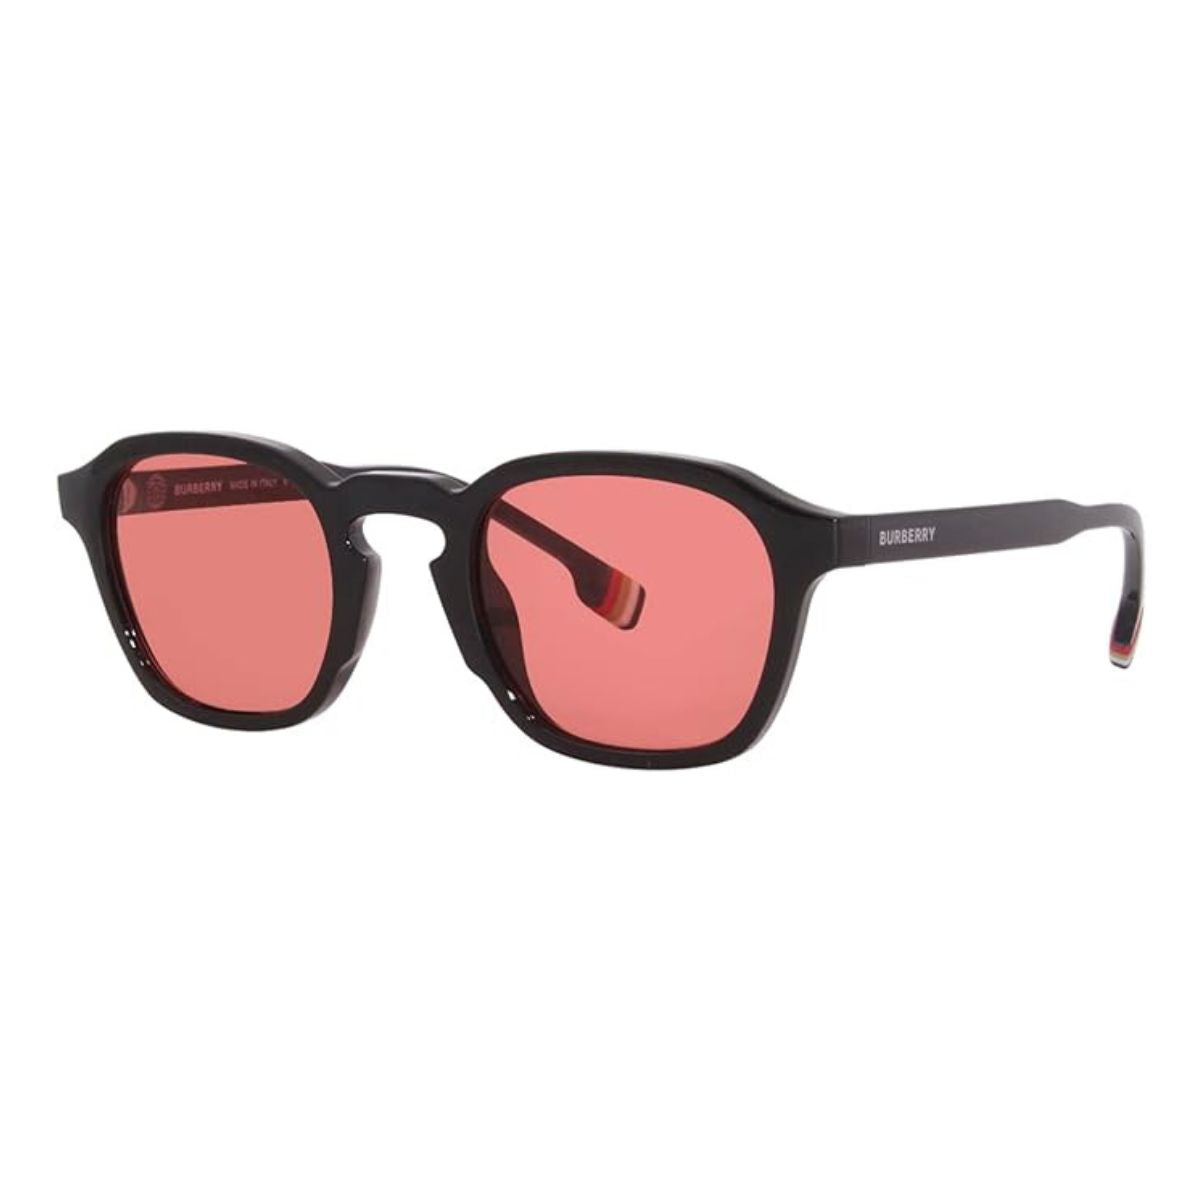 "Close-up view of Burberry 4378-U 3001/84 sunglasses, highlighting the contrast between the black frame and the red lenses, perfect for fashion-forward individuals."